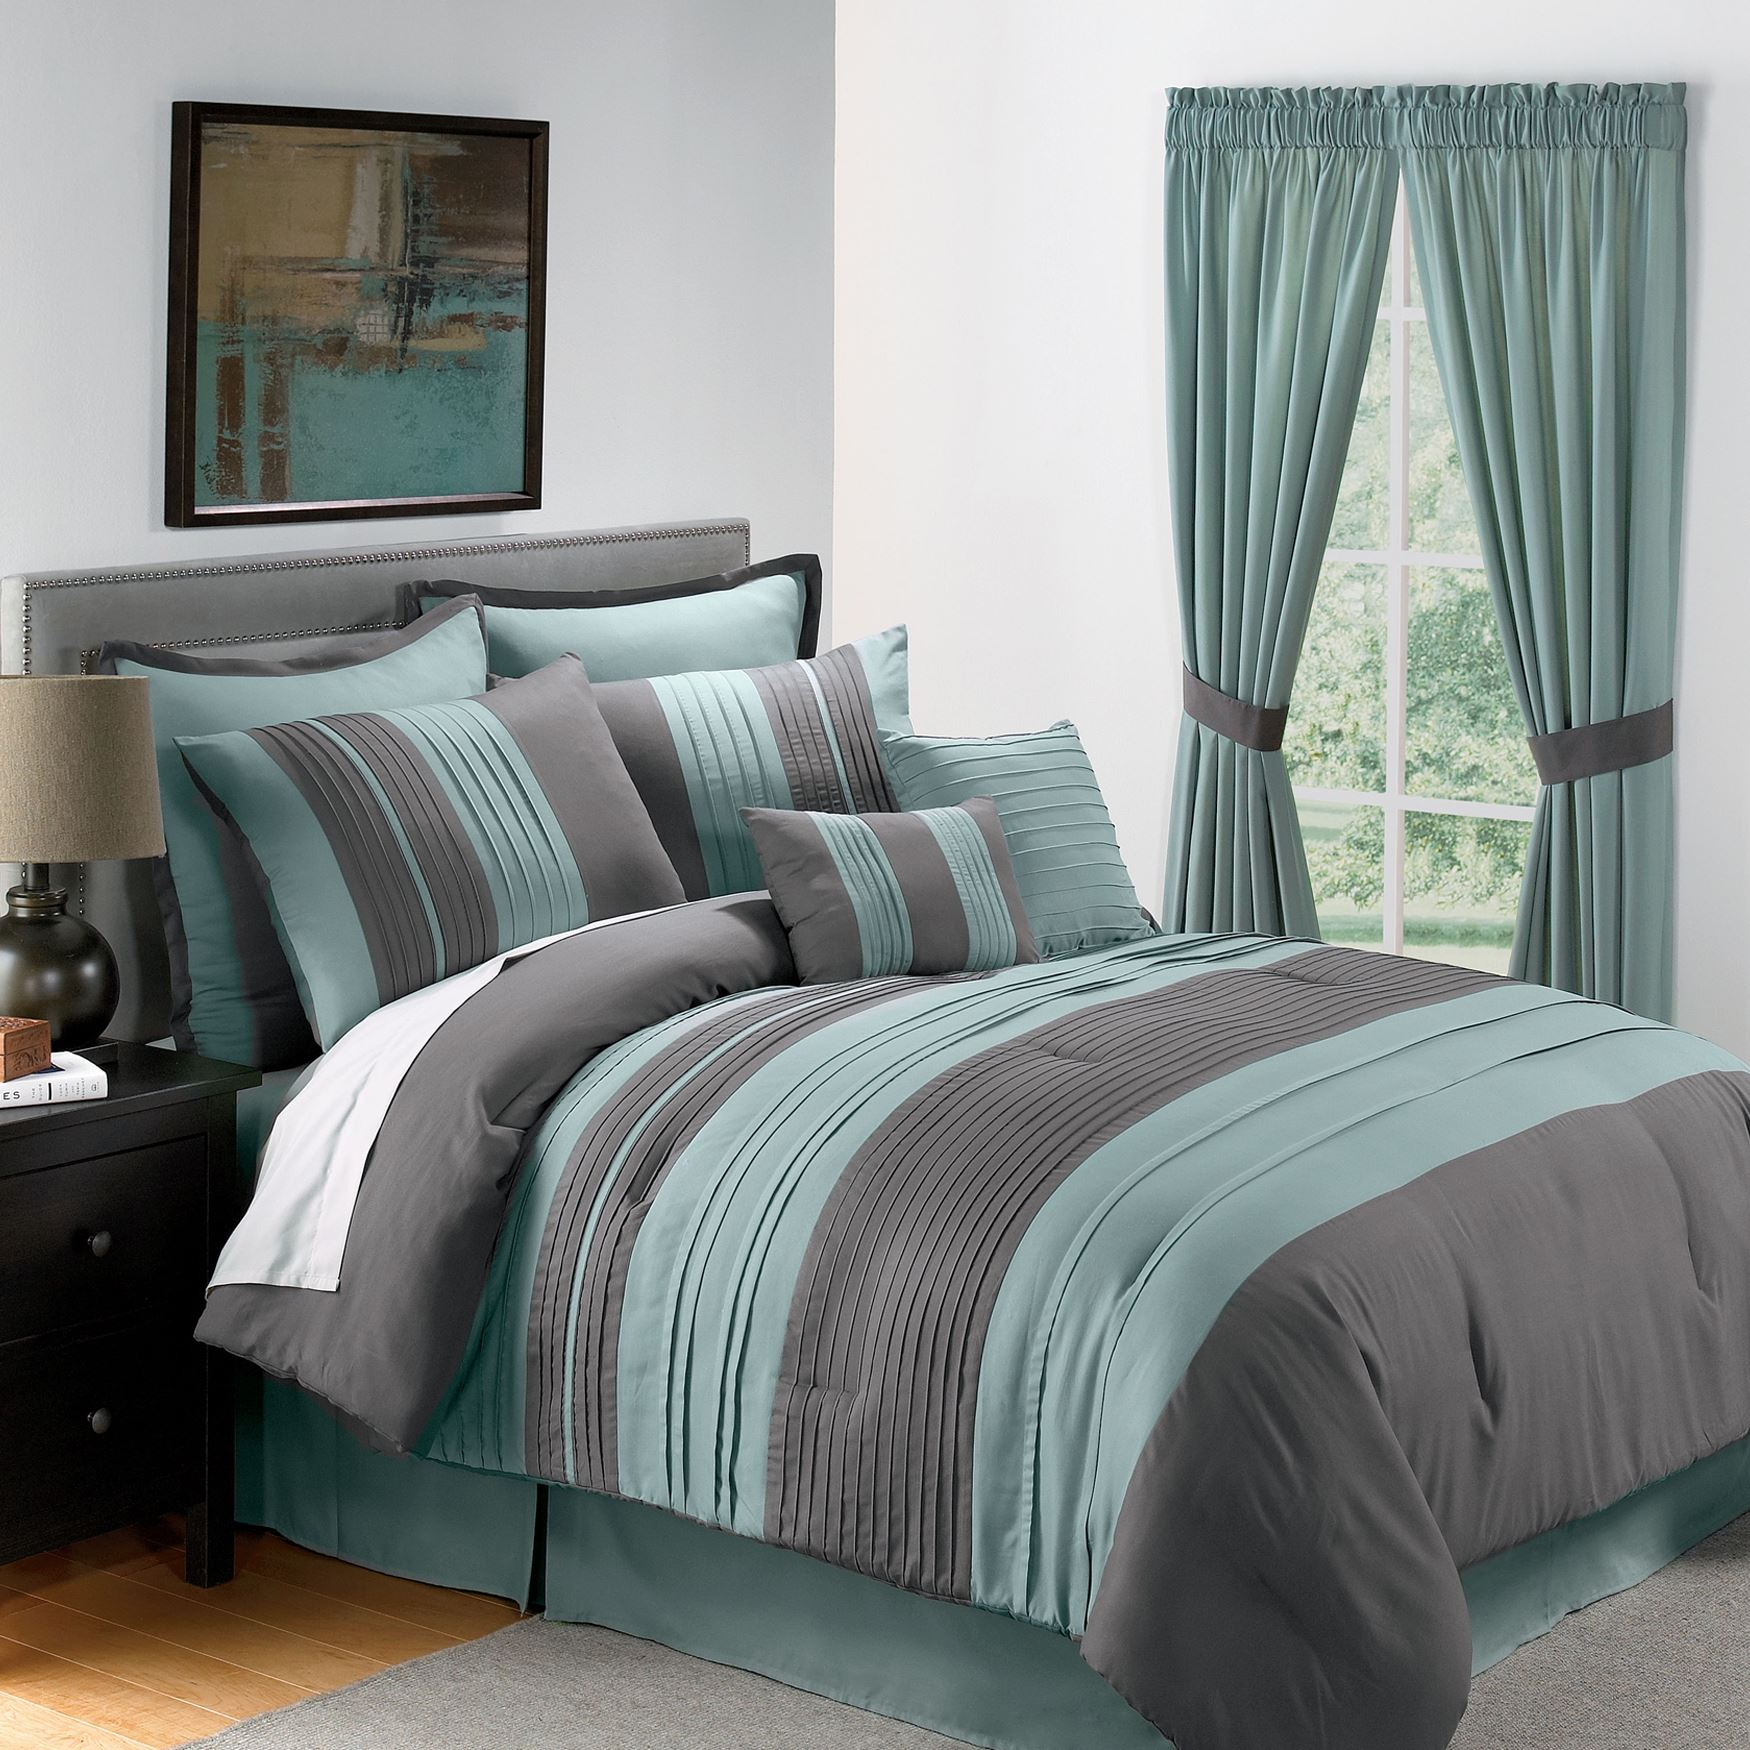 Comforter Sets Awesome Teal Comforter Sets Teal Curtains with regard to size 1750 X 1750